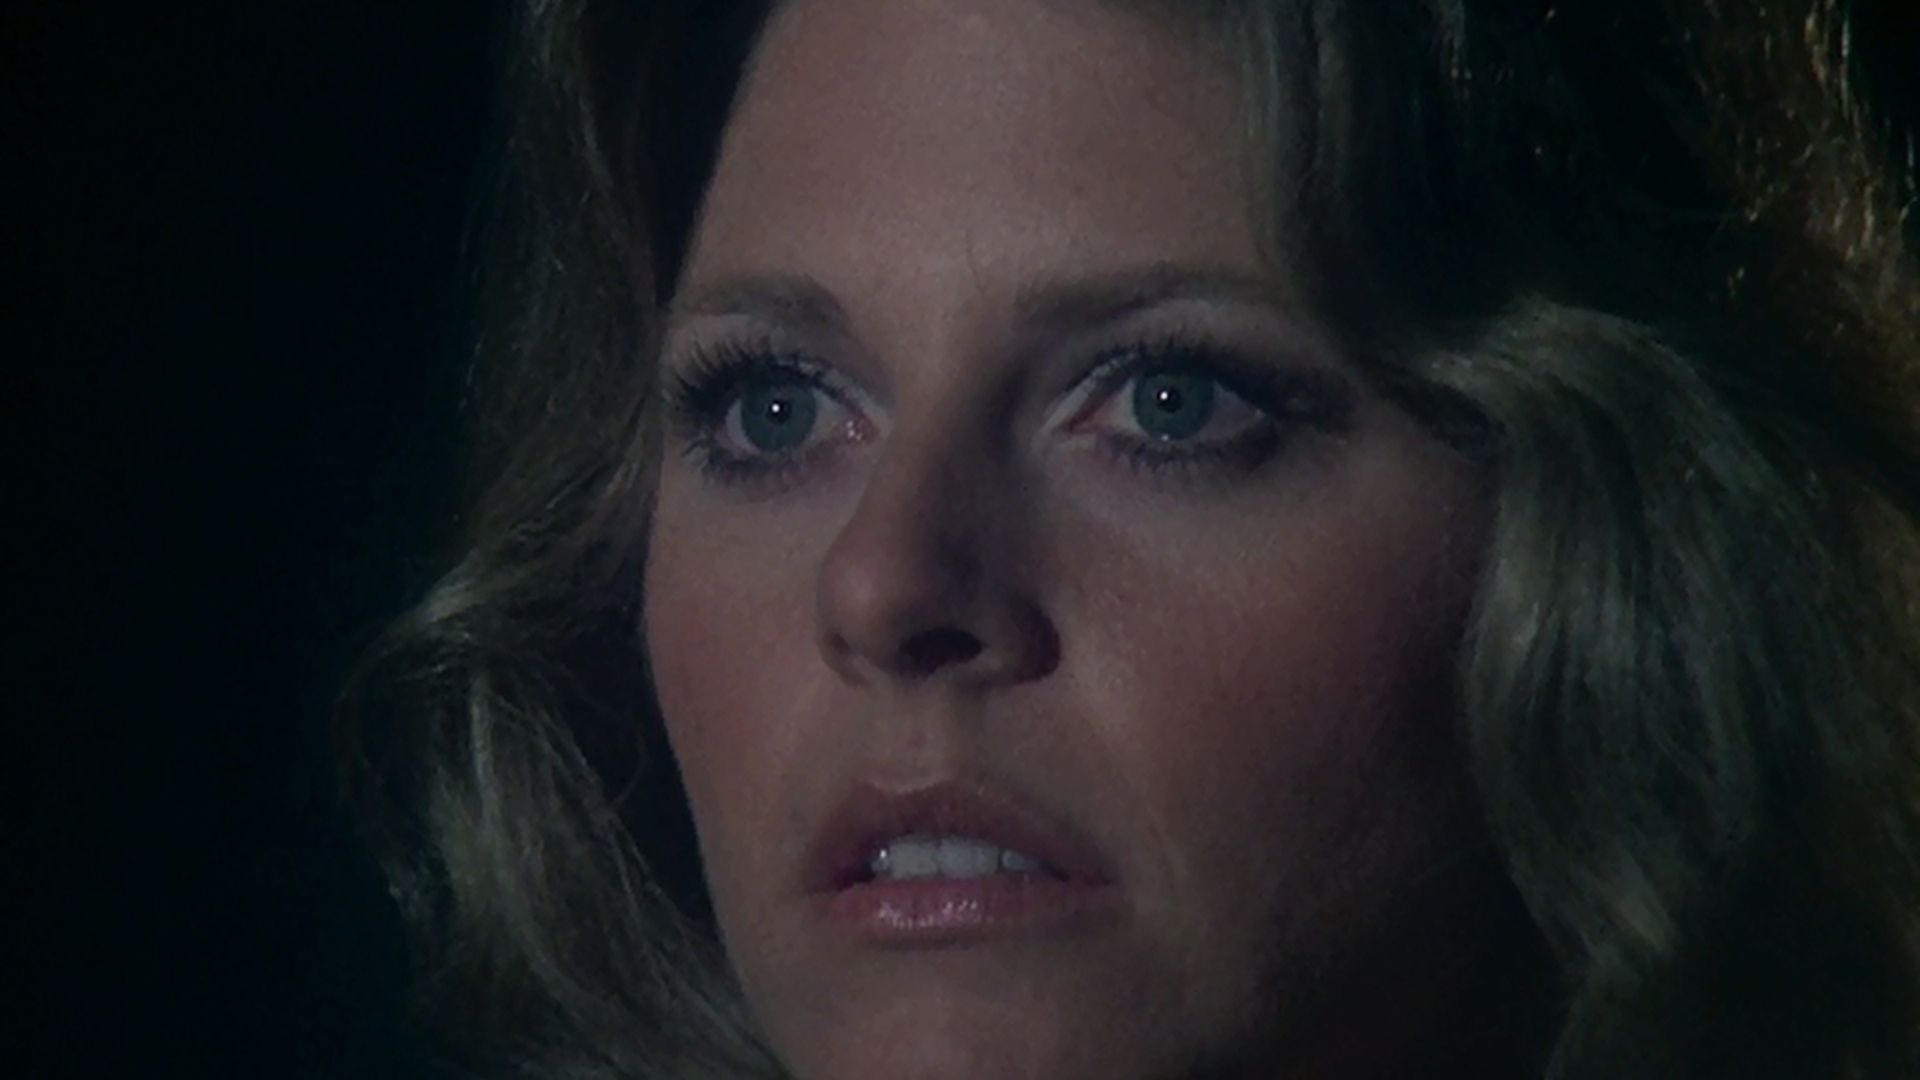 The Bionic Woman background